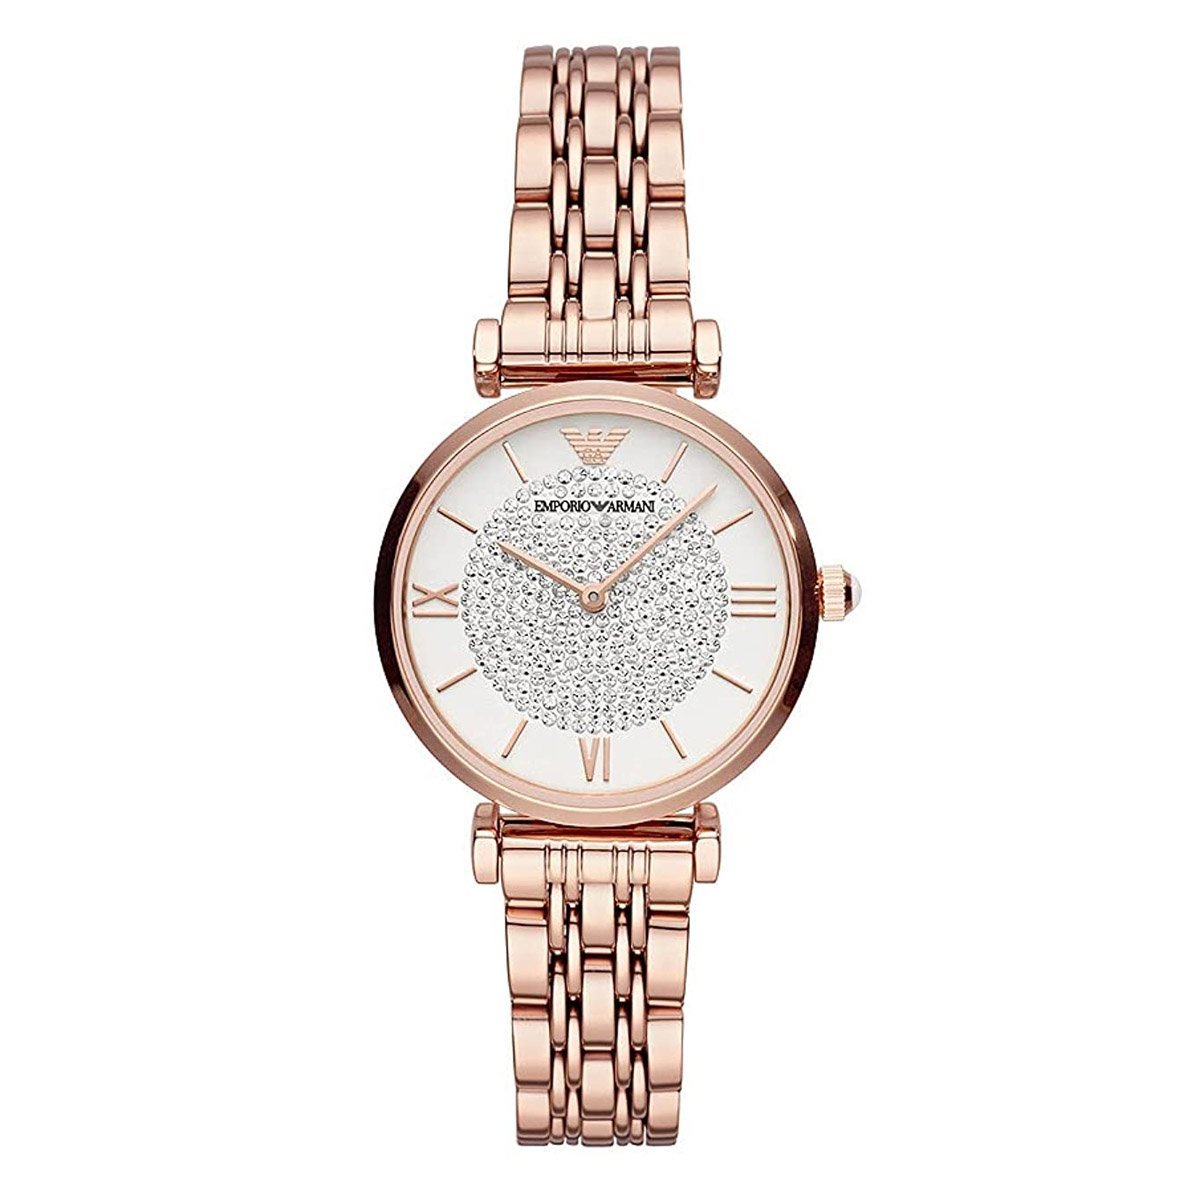 Emporio Armani Ladies T-Bar Gianni Watch Rose Gold Plated AR11244 - Watches & Crystals